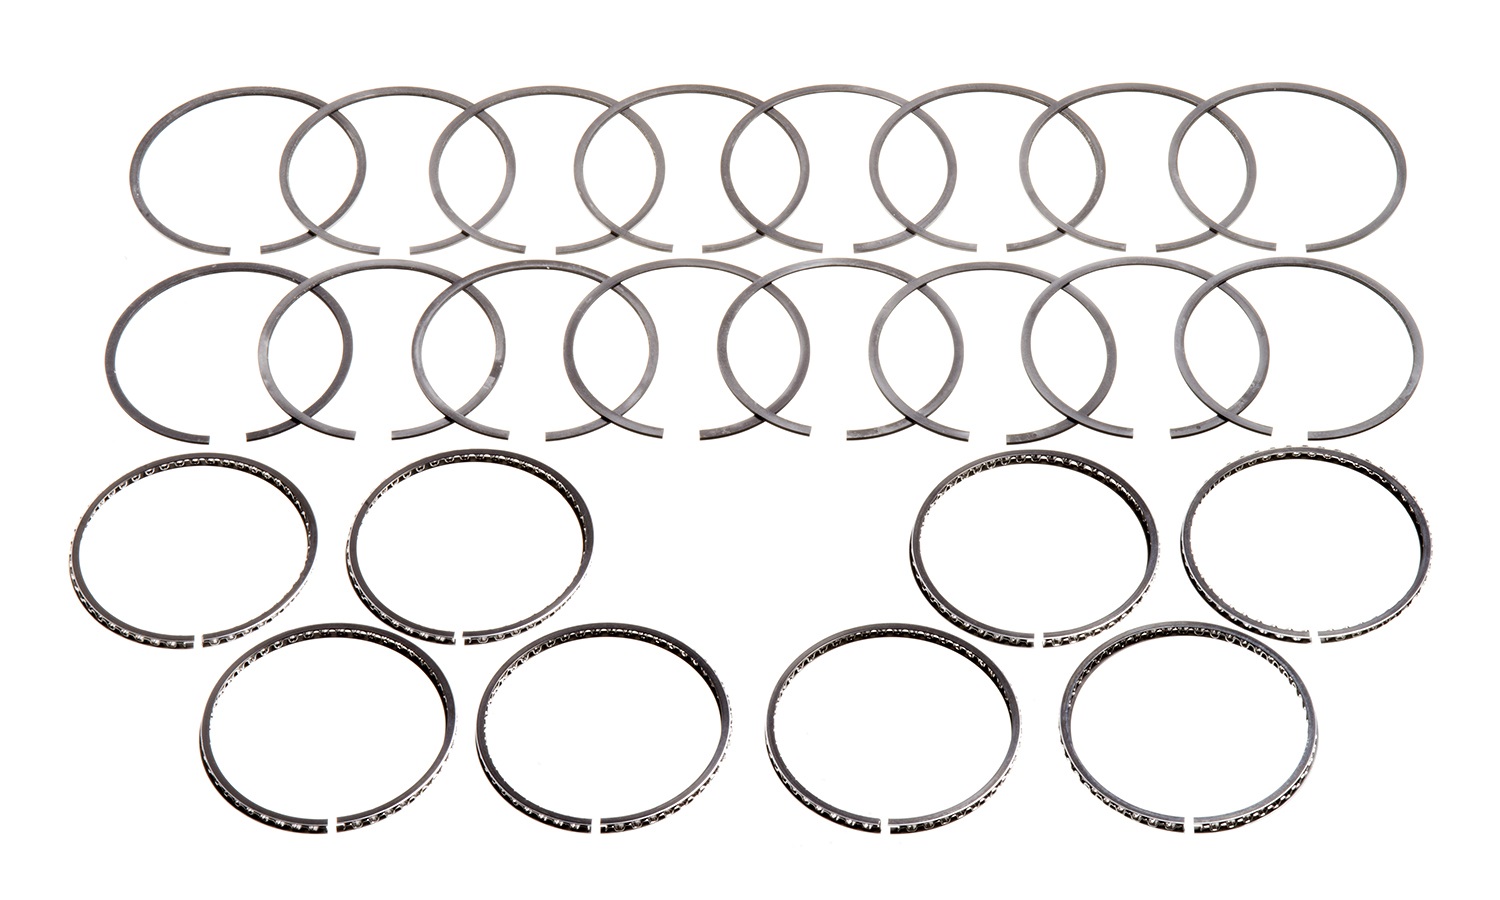 Show details for Hastings 2M5528065 Piston Ring Set4.380 1/16 1/16 3/16